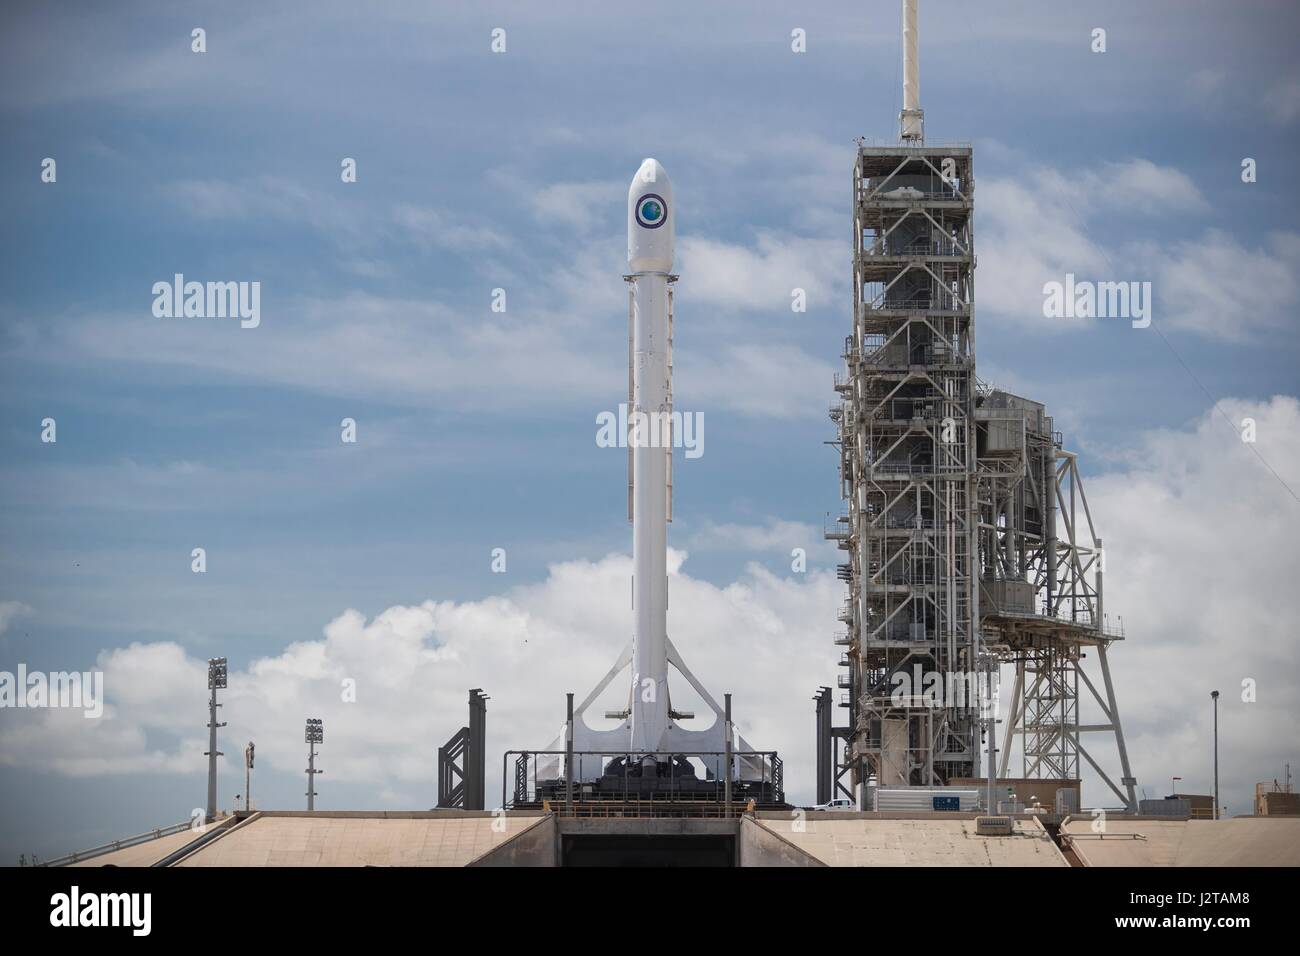 The SpaceX Falcon 9 rocket carrying a classified military satellite sits on Launch Complex 39A ready for blast off at the Kennedy Space Center April 29, 2017 in Cape Canaveral, Florida. The SpaceX mission was scrubbed at the last minute due to a faulty sensor and will try again on May 1st. Stock Photo